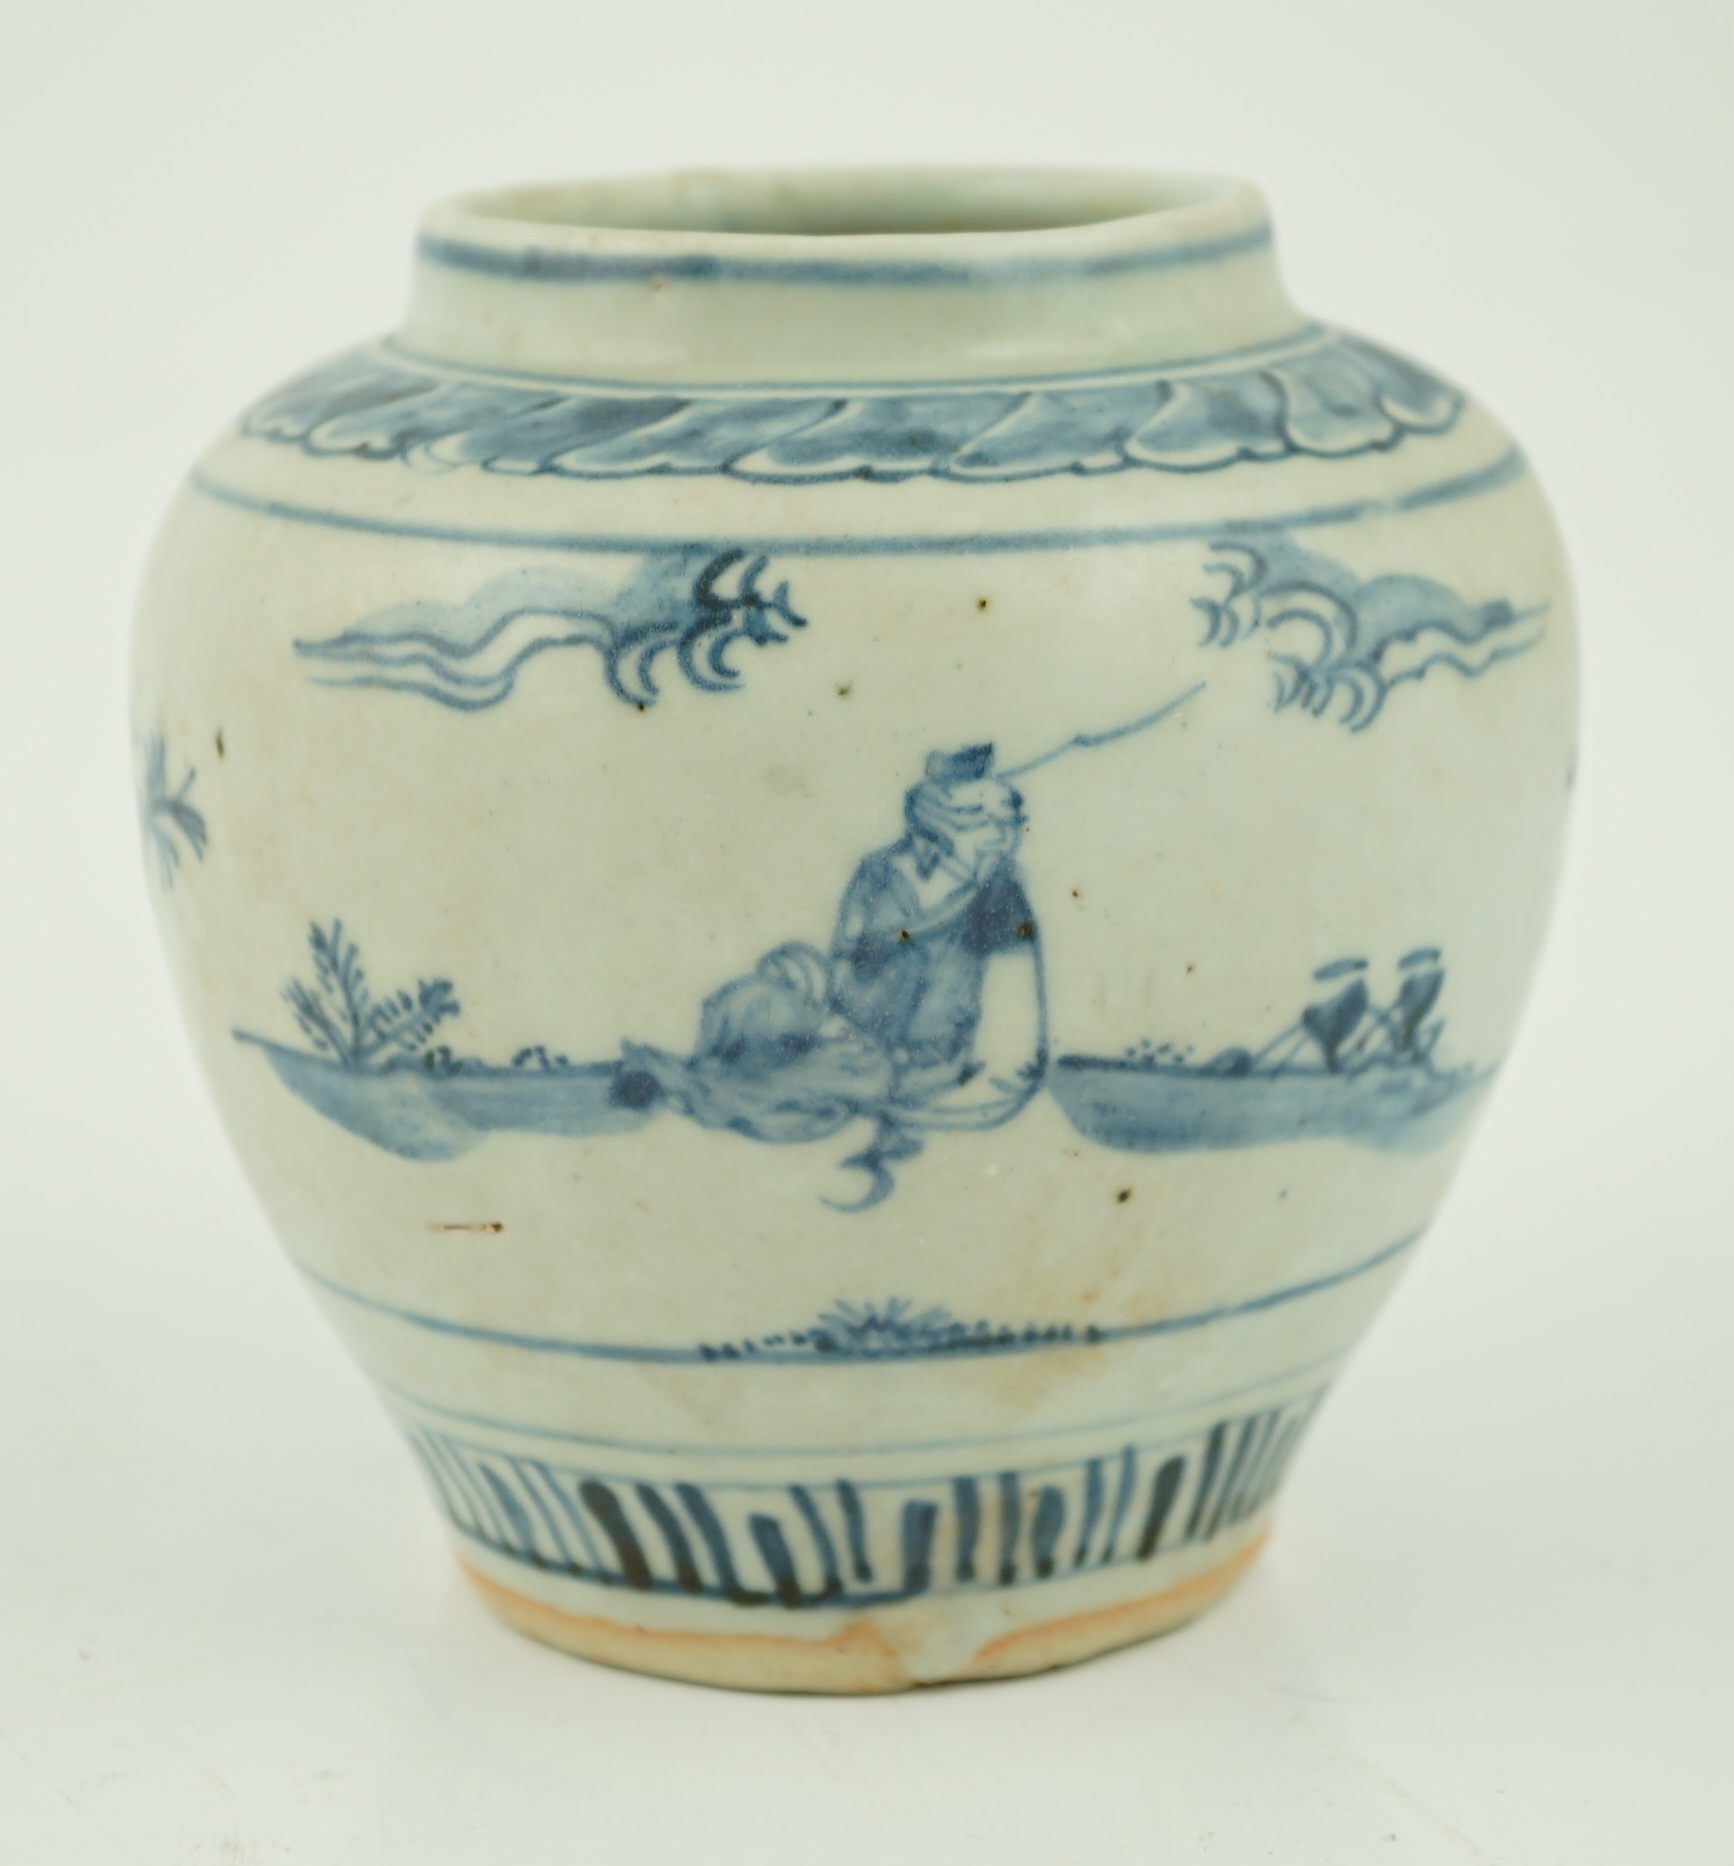 A Chinese Ming blue and white jar, late 15th century